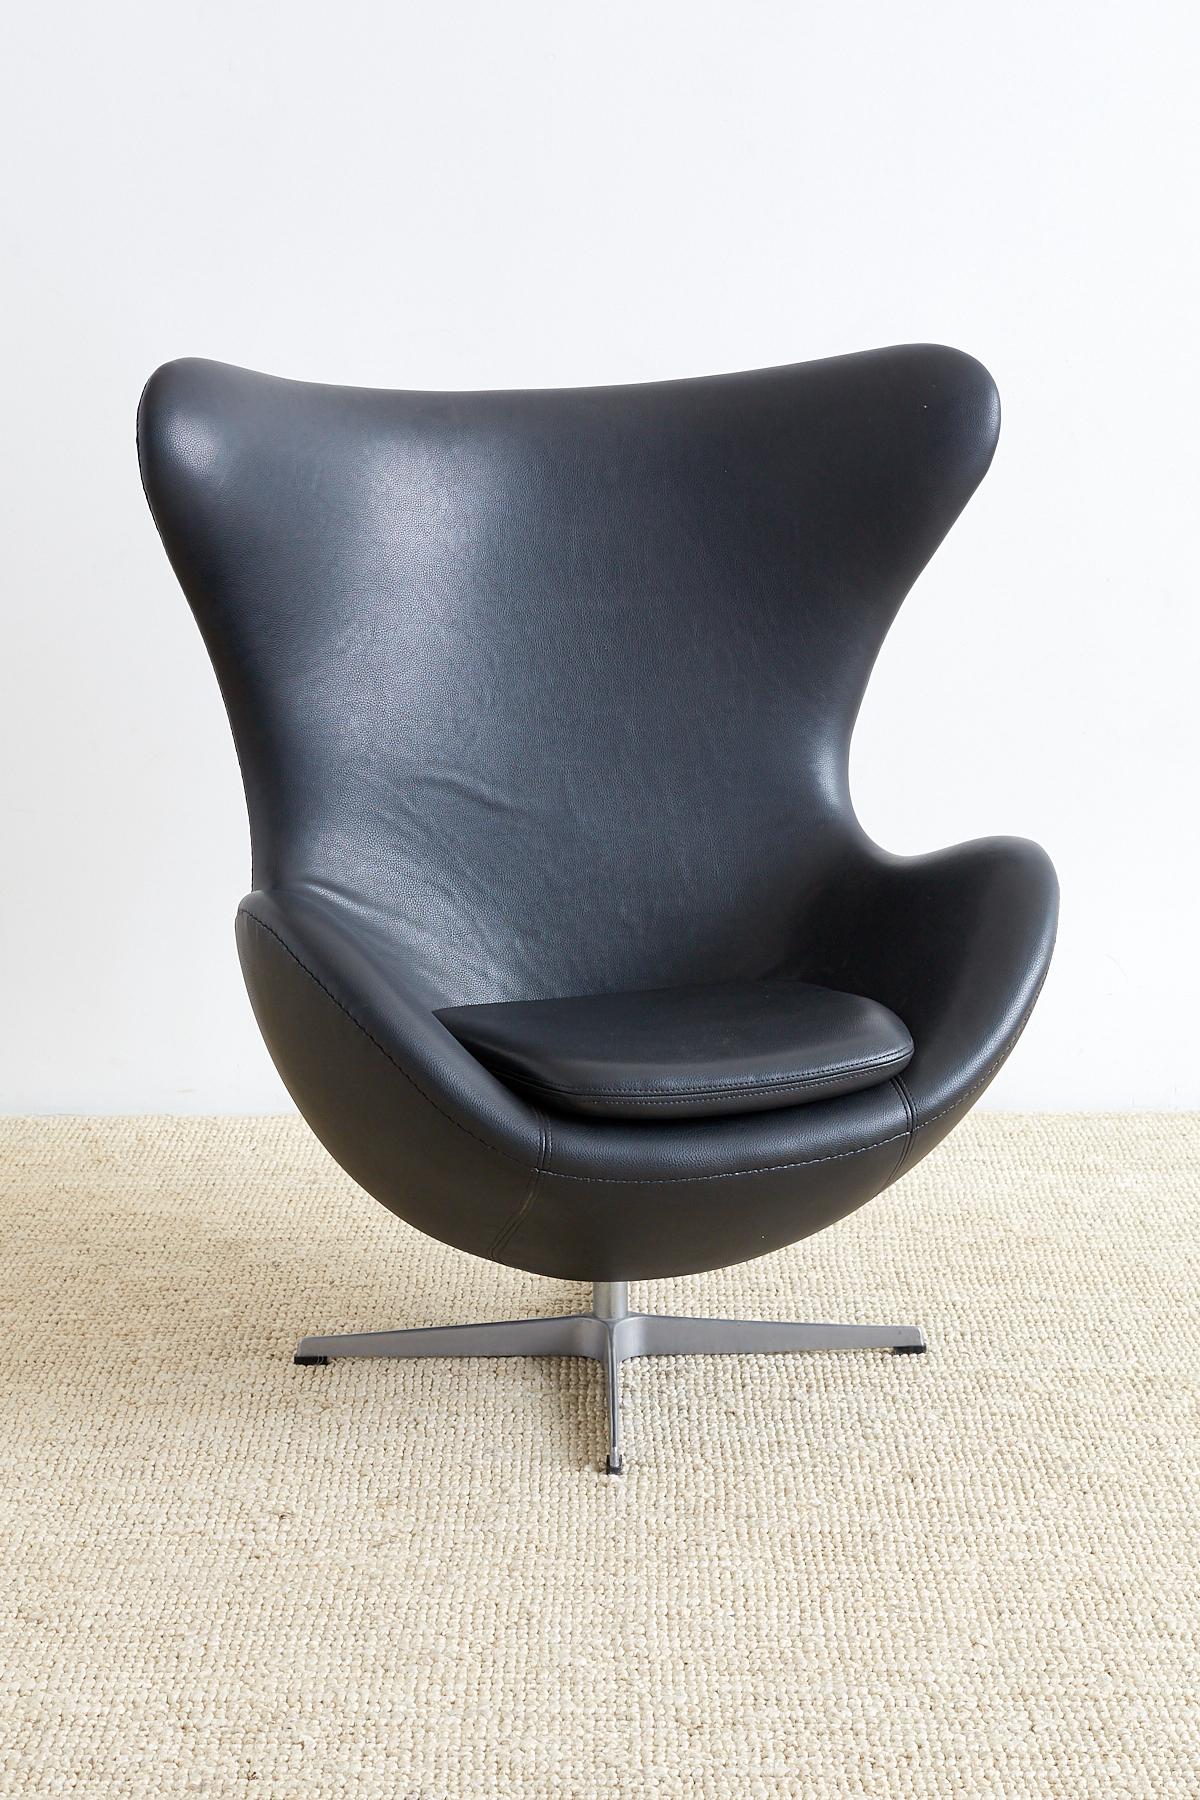 Authentic Arne Jacobsen for Fritz Hansen black egg chair originally designed for the SAS hotel in Copenhagen. Features a hand-stitched faux leather upholstery that has replaced the original black leather. Supported by a one piece cast aluminum